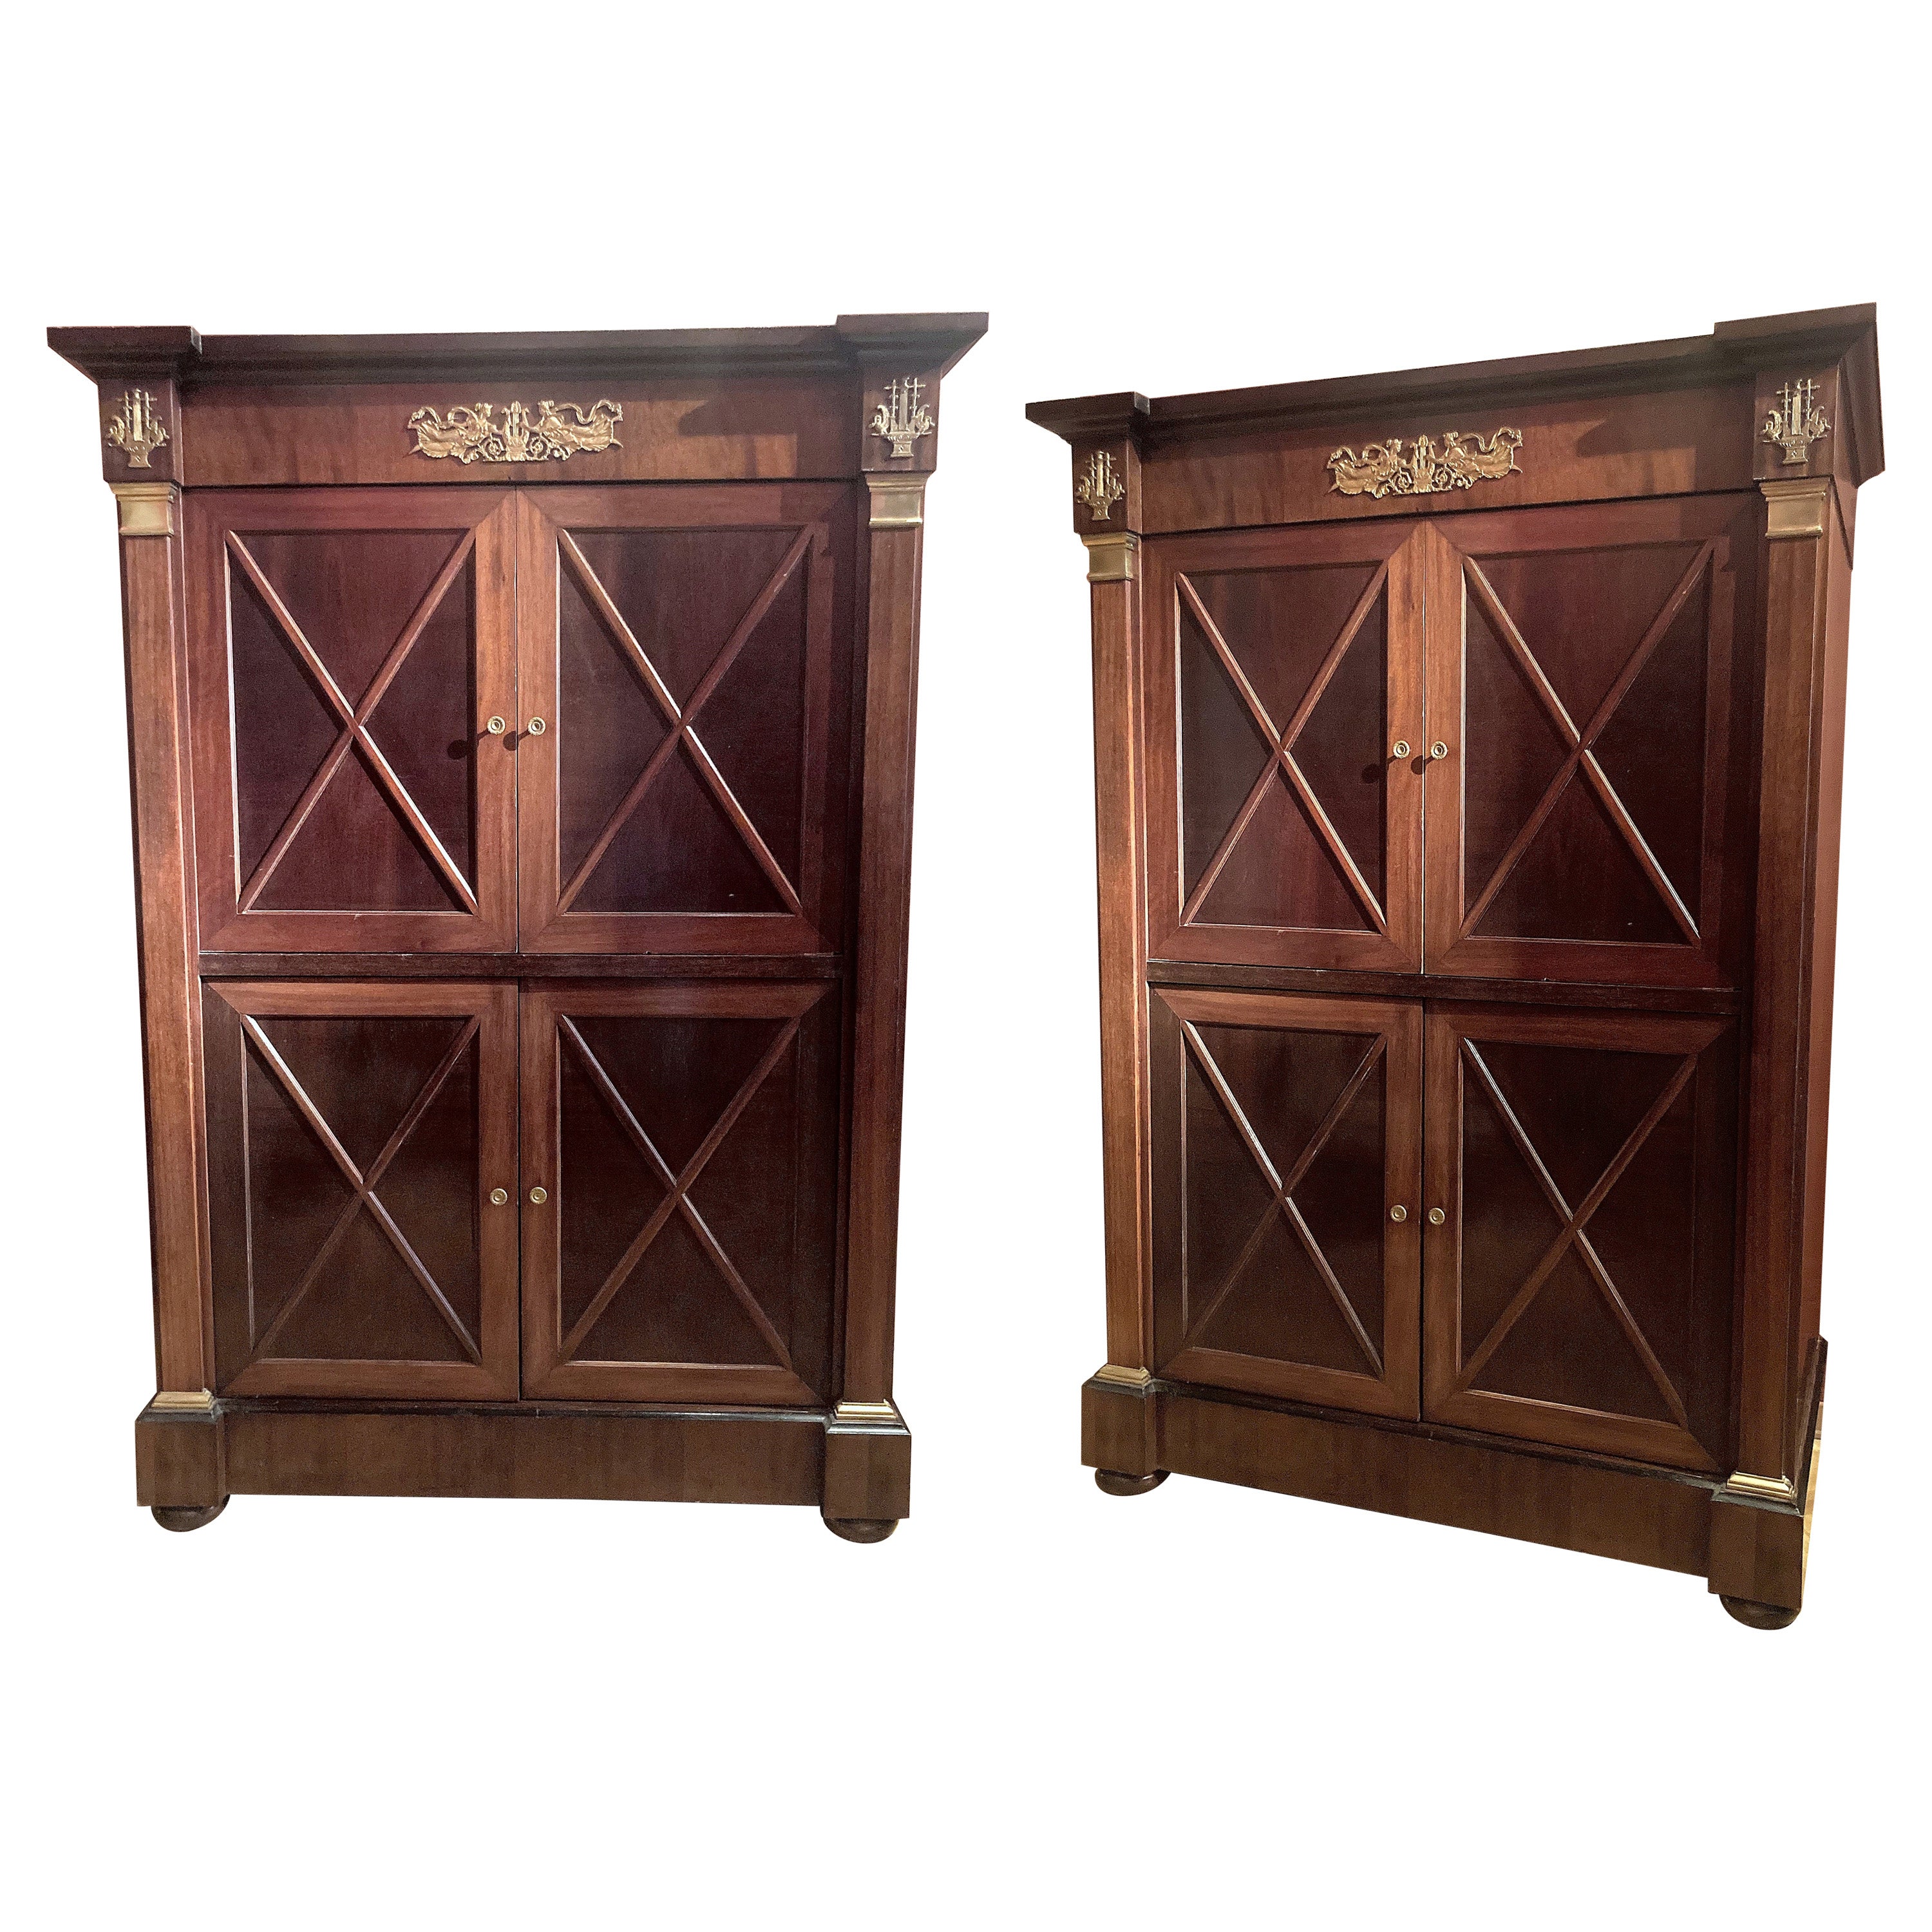 French Empire Style Mahogany and Ormolu Four Doors Cabinets, Armoire or Dry Bar 